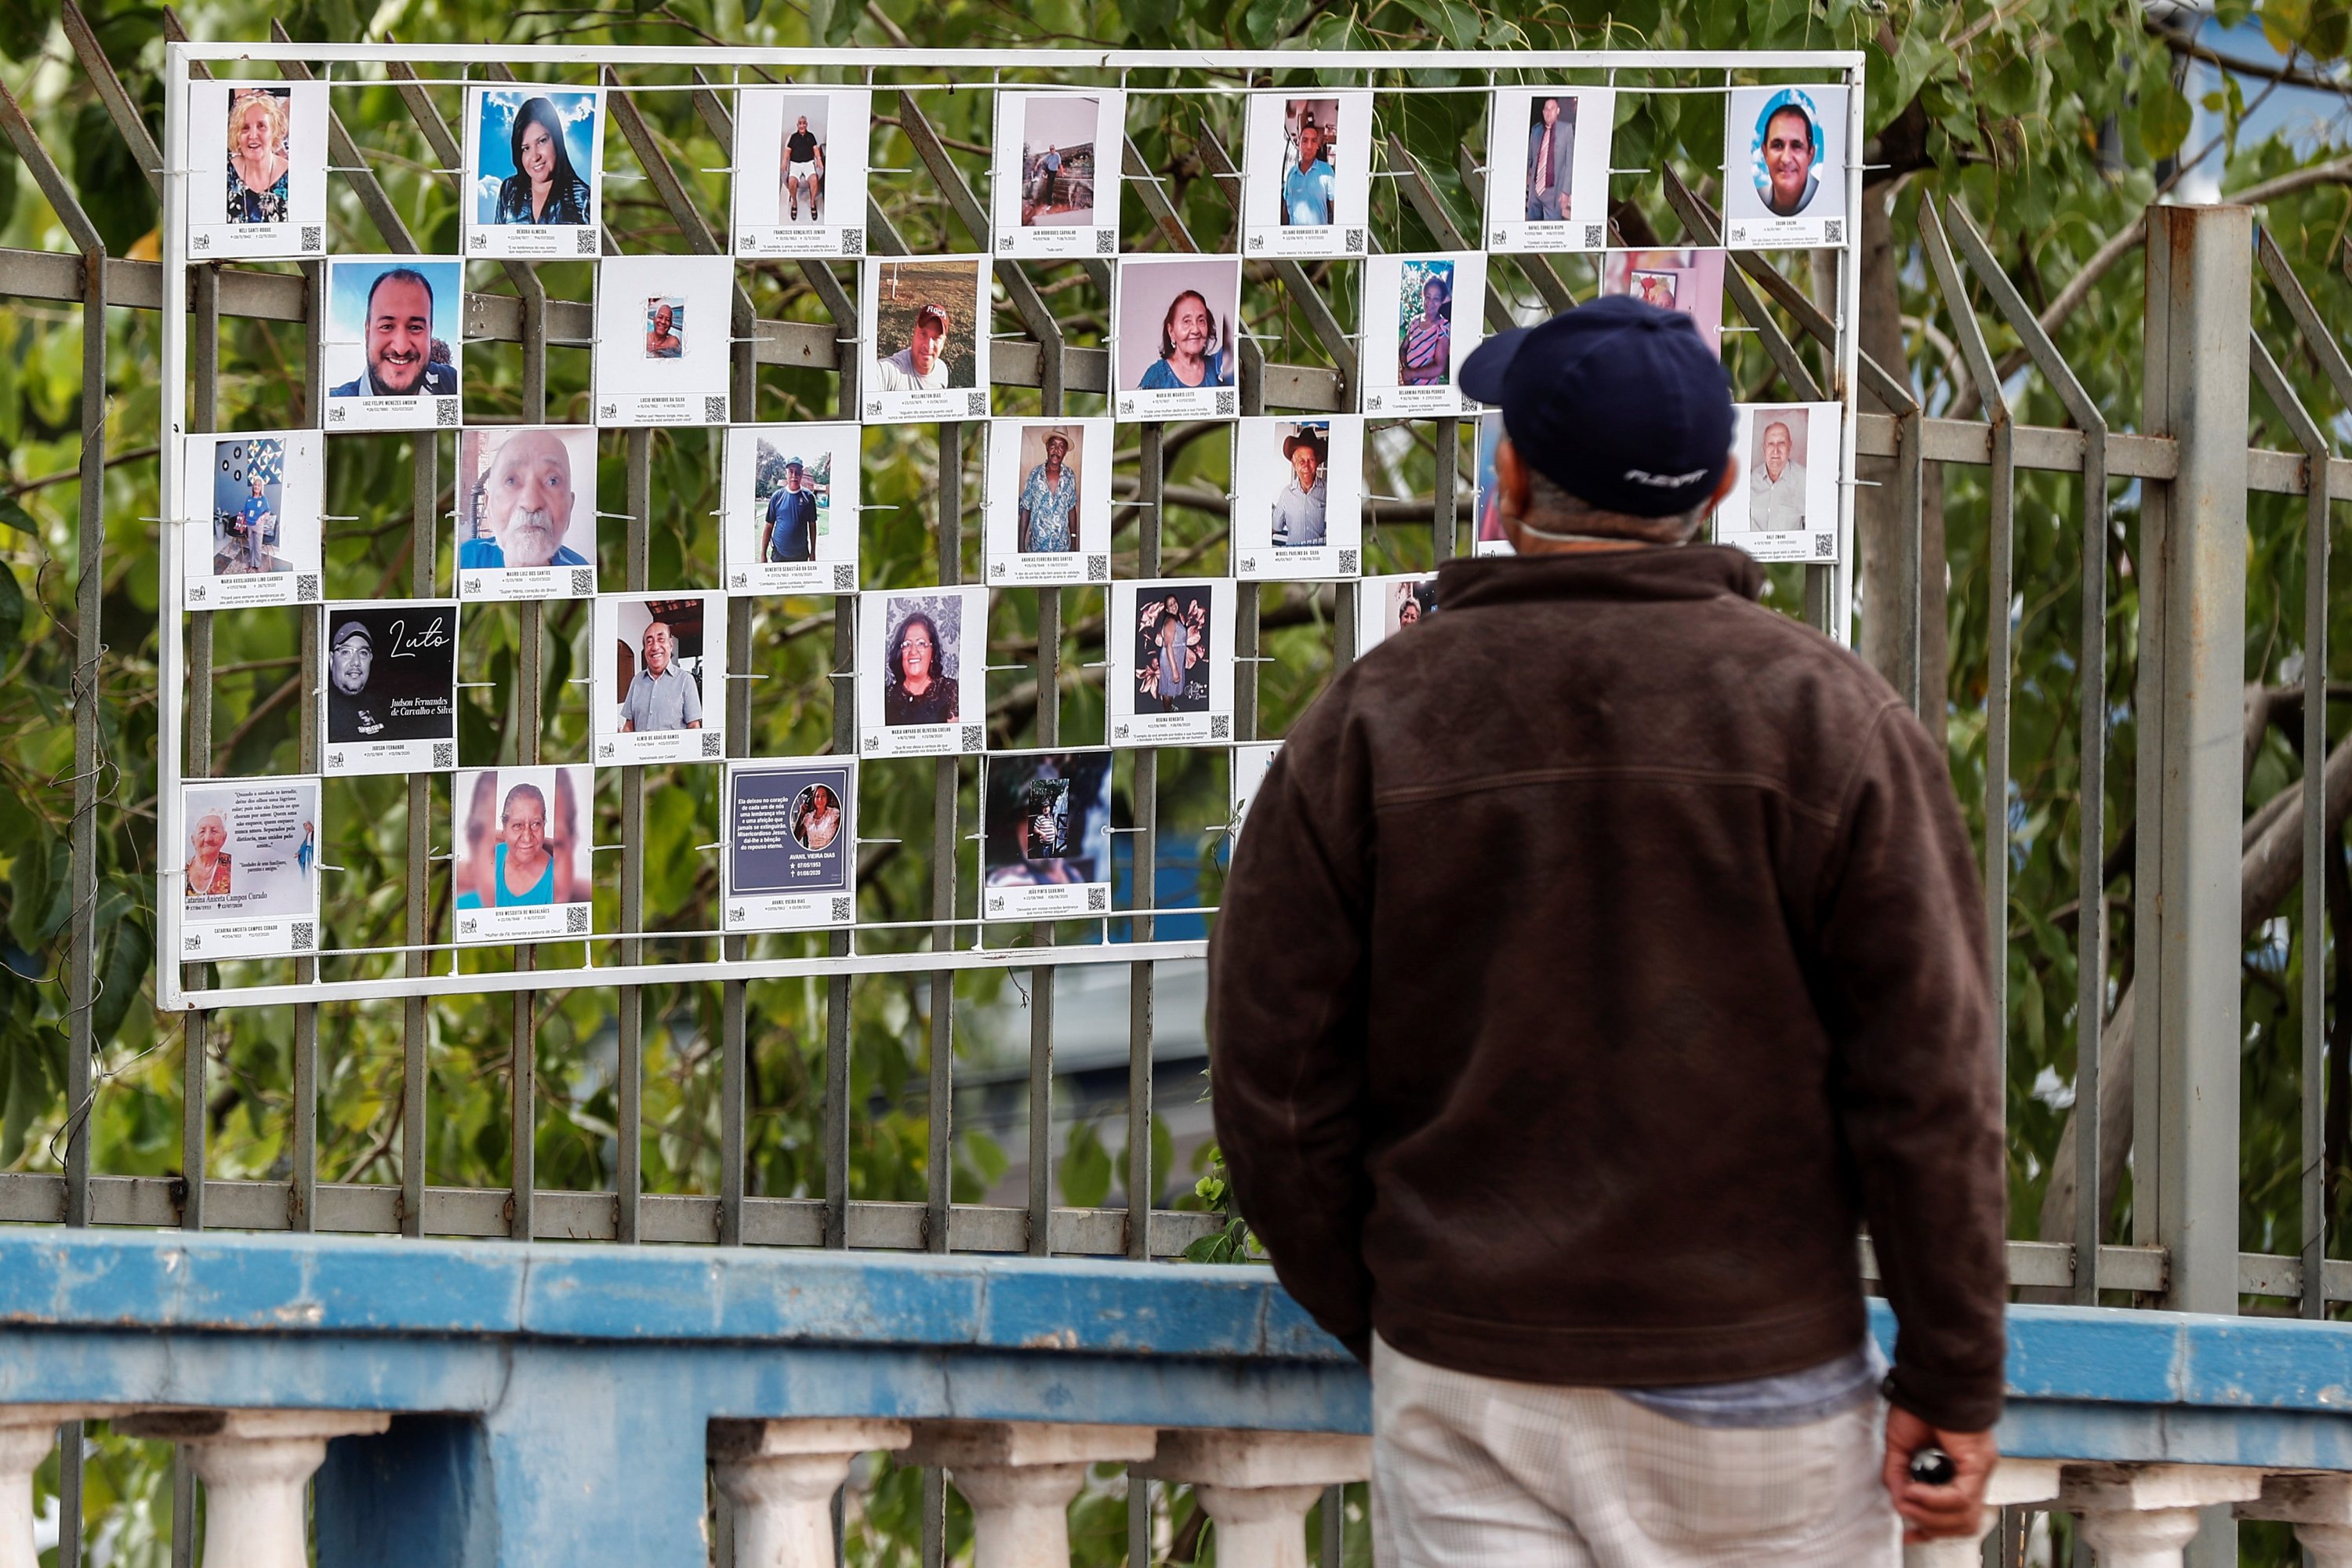 A man observes some photographs in the "Inmensurables" (Immeasurable) exhibition that is part of the memorial of the victims of COVID-19, in Cuiaba, in the state of Mato Grosso, Brazil, June 19, 2021. (EPA Photo)